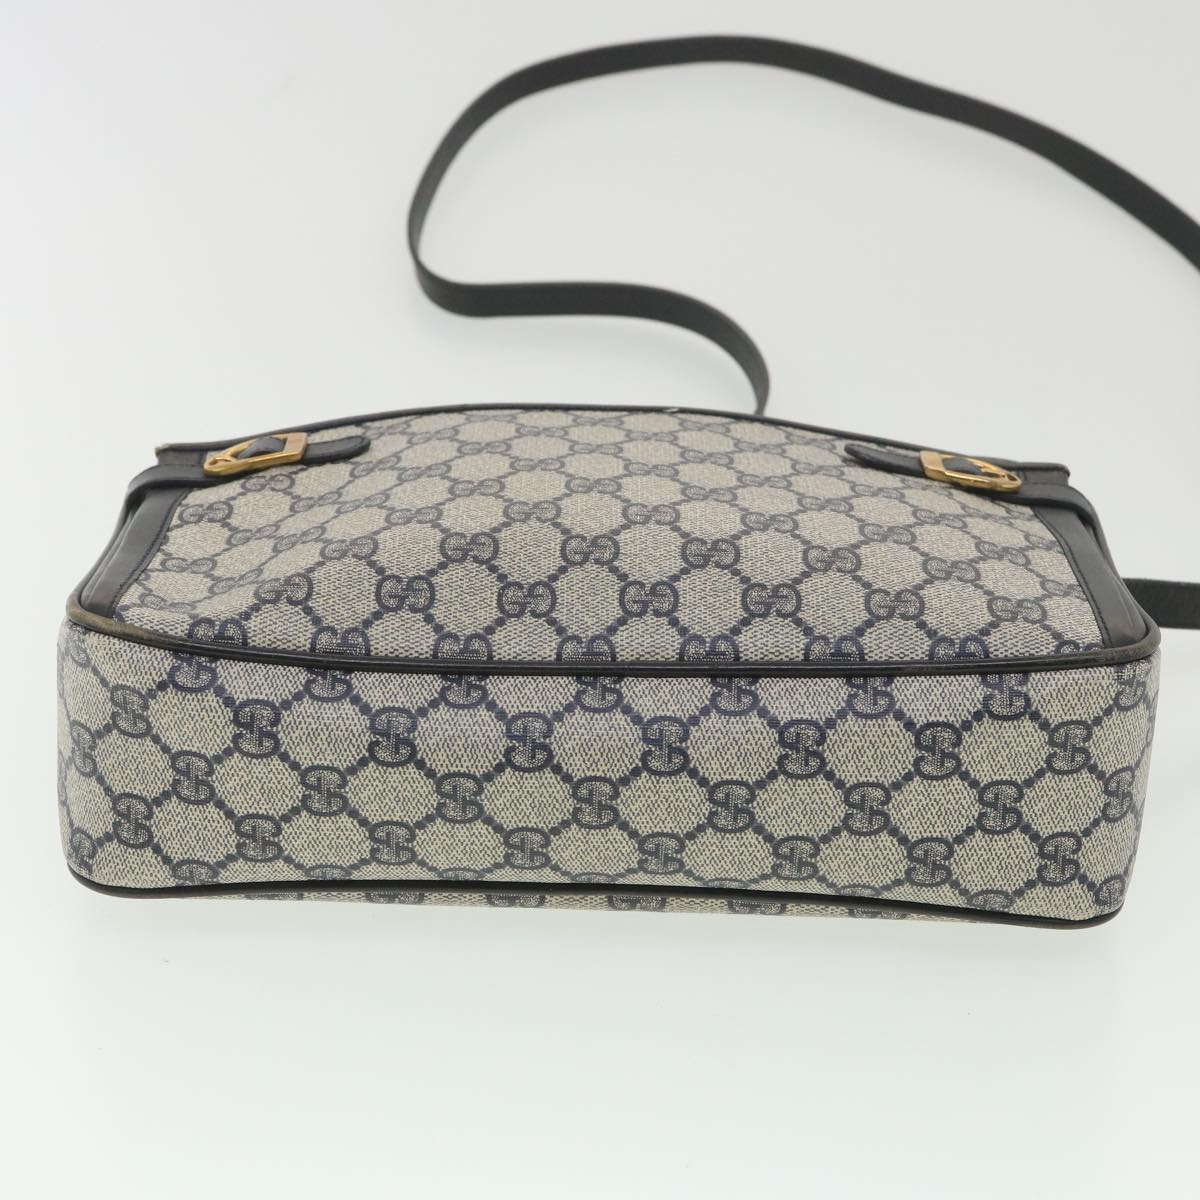 GUCCI GG Canvas Shoulder Bag PVC Leather Gray Navy 001.29.0117 Auth yk6180